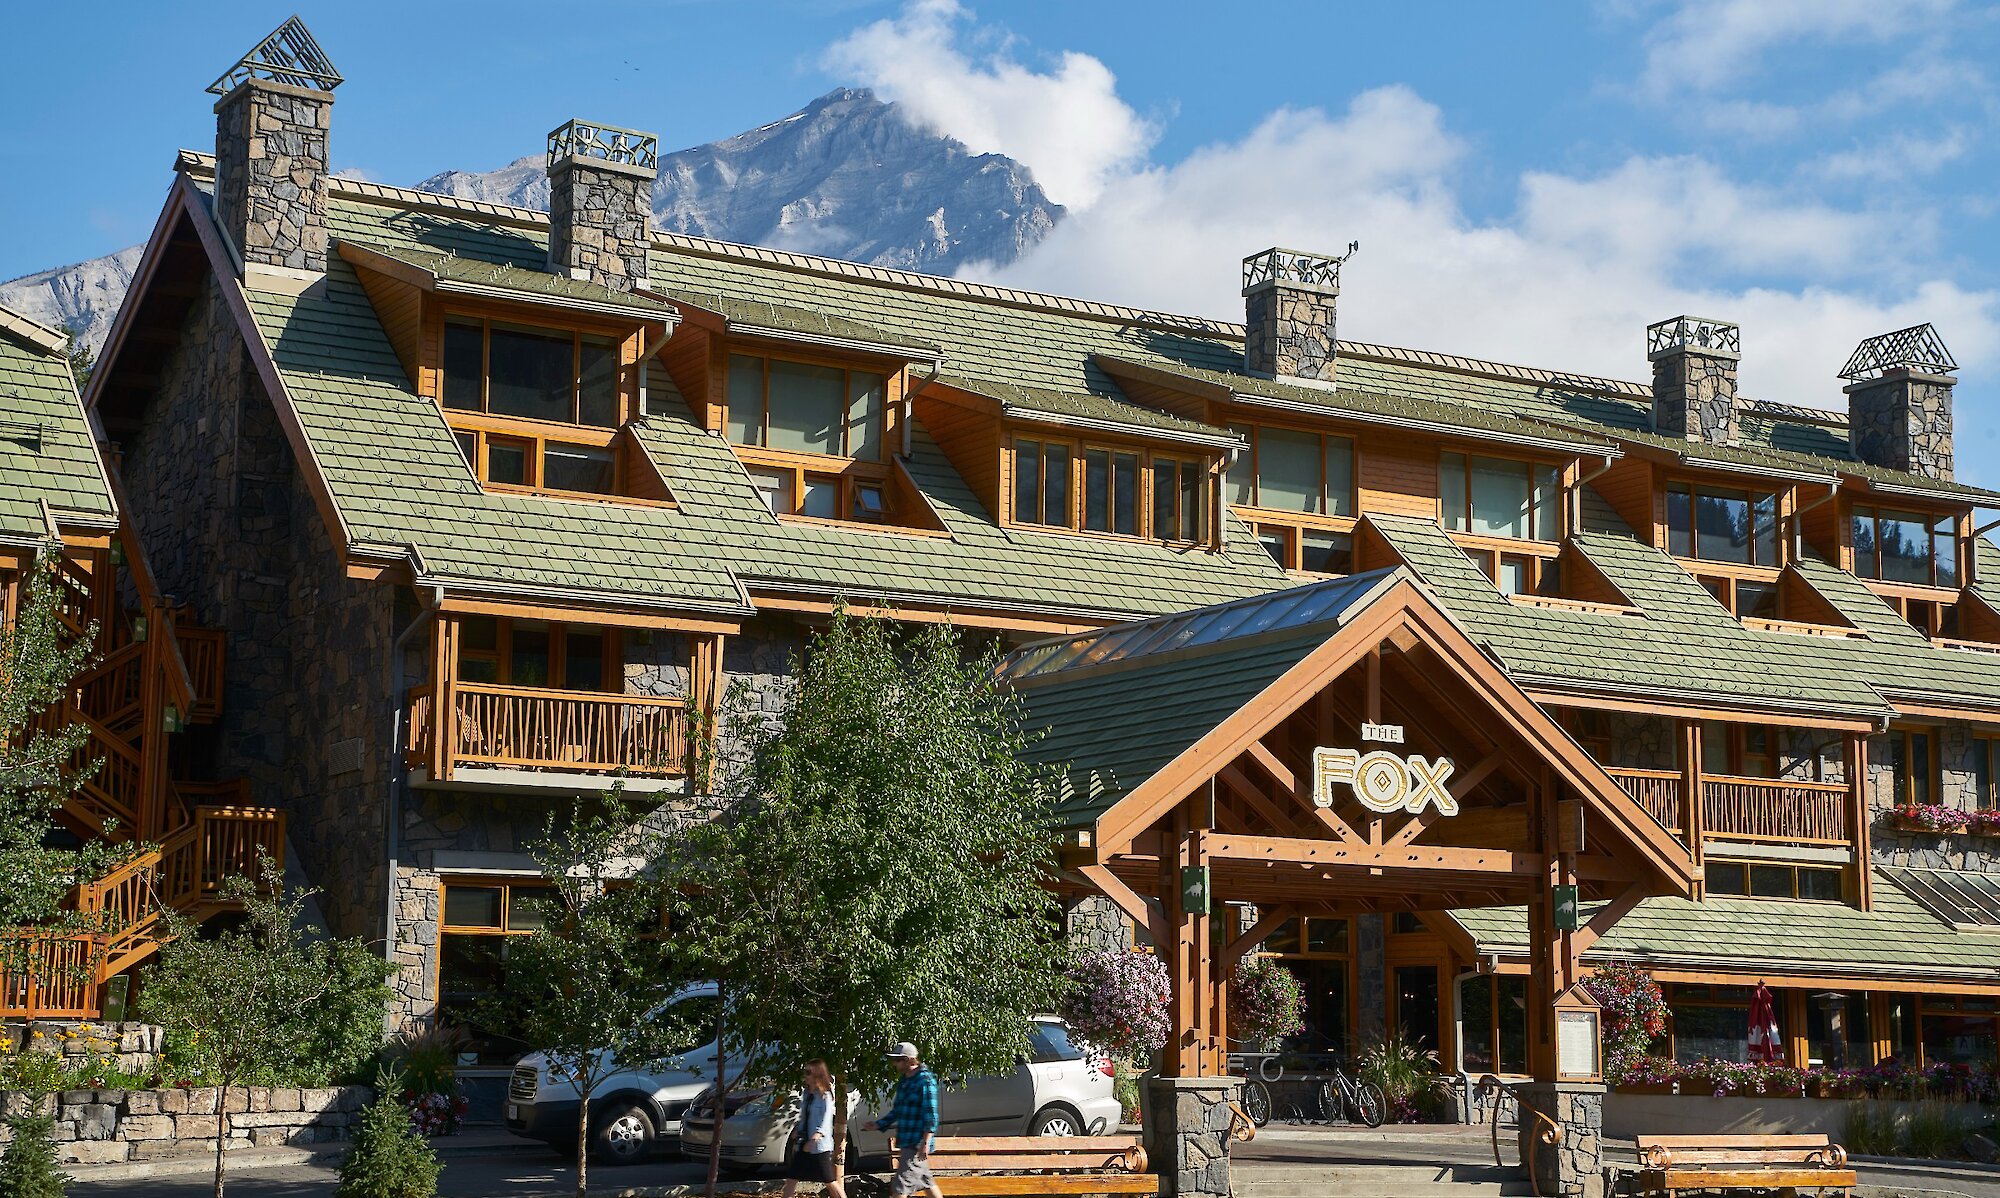 Exterior of the Fox Hotel & Suites in Banff